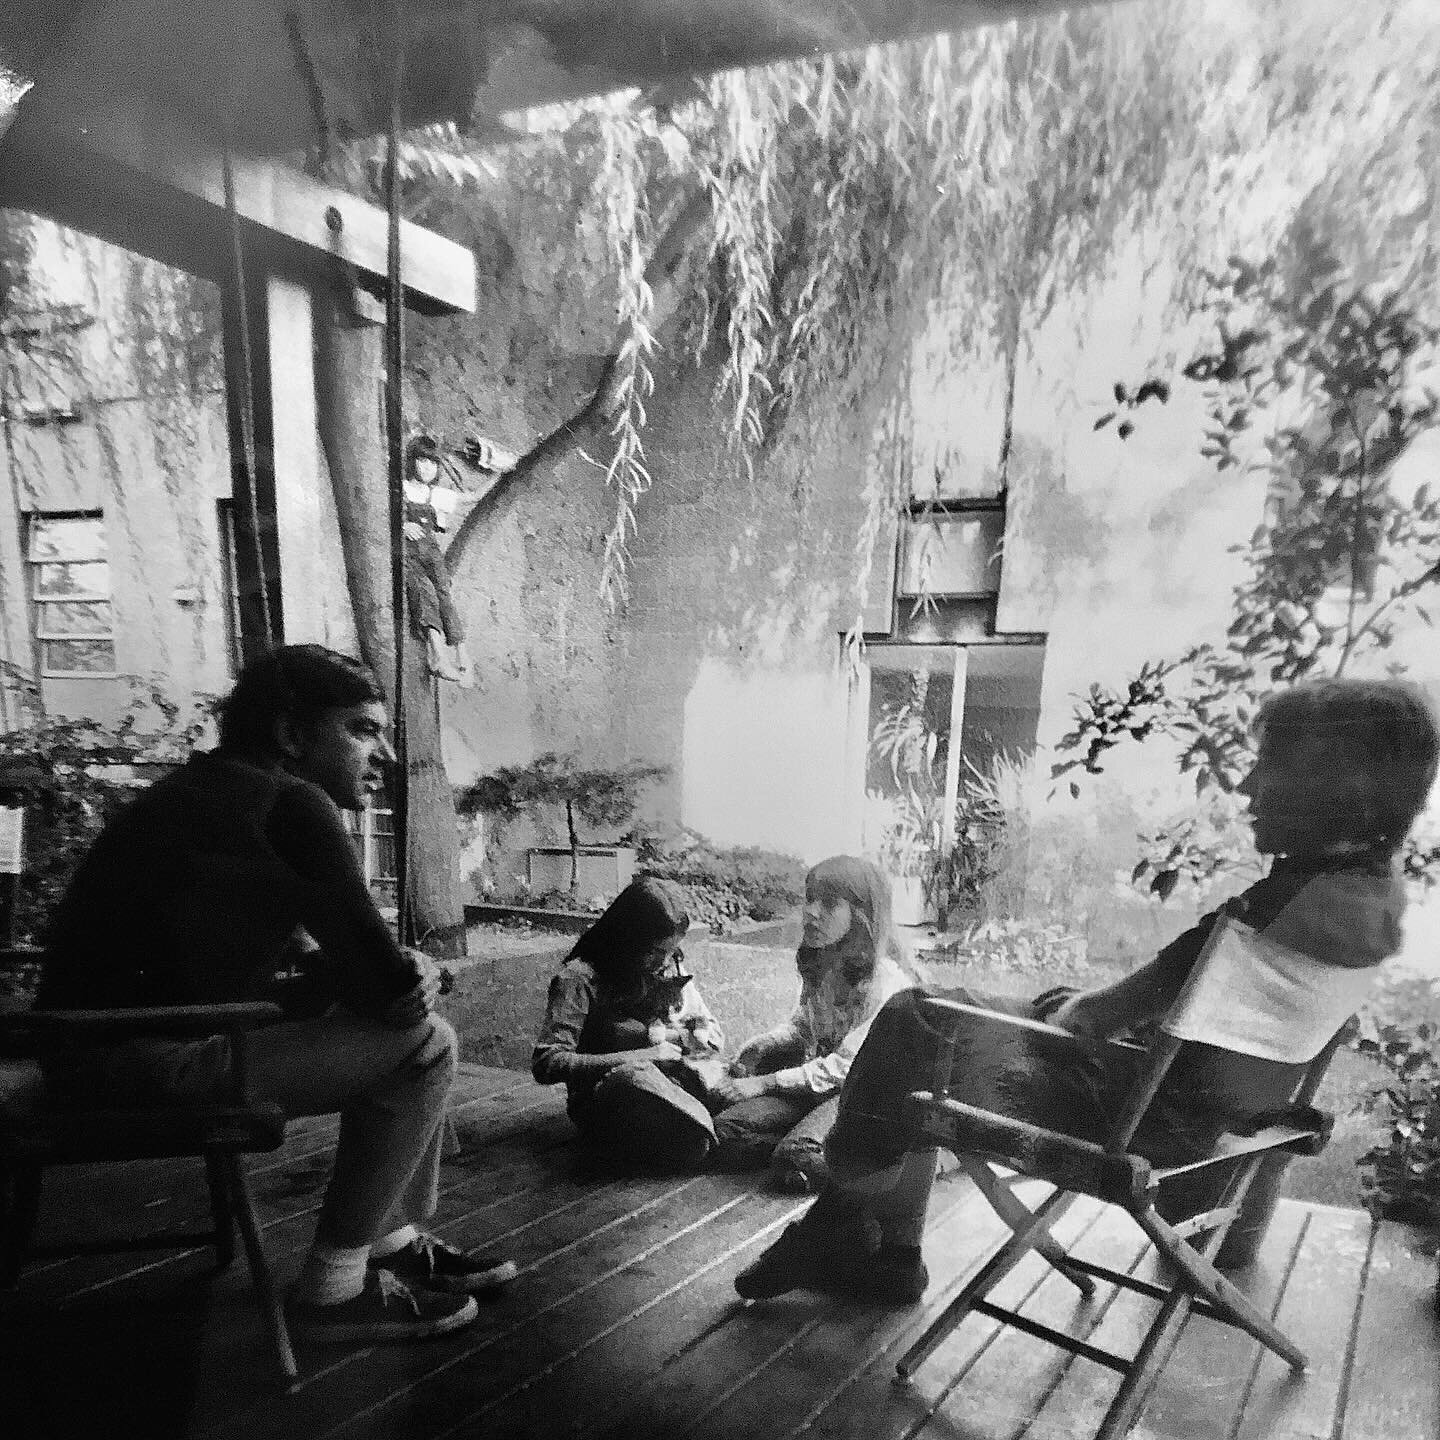 In the back yard of the house my parents built on the corner of  willow place and state in BK in 1970 - my bro  in the tree and me and my sister on the deck. ( i think this pic was taken for HG magazine story on the house ) I recently say that Willow